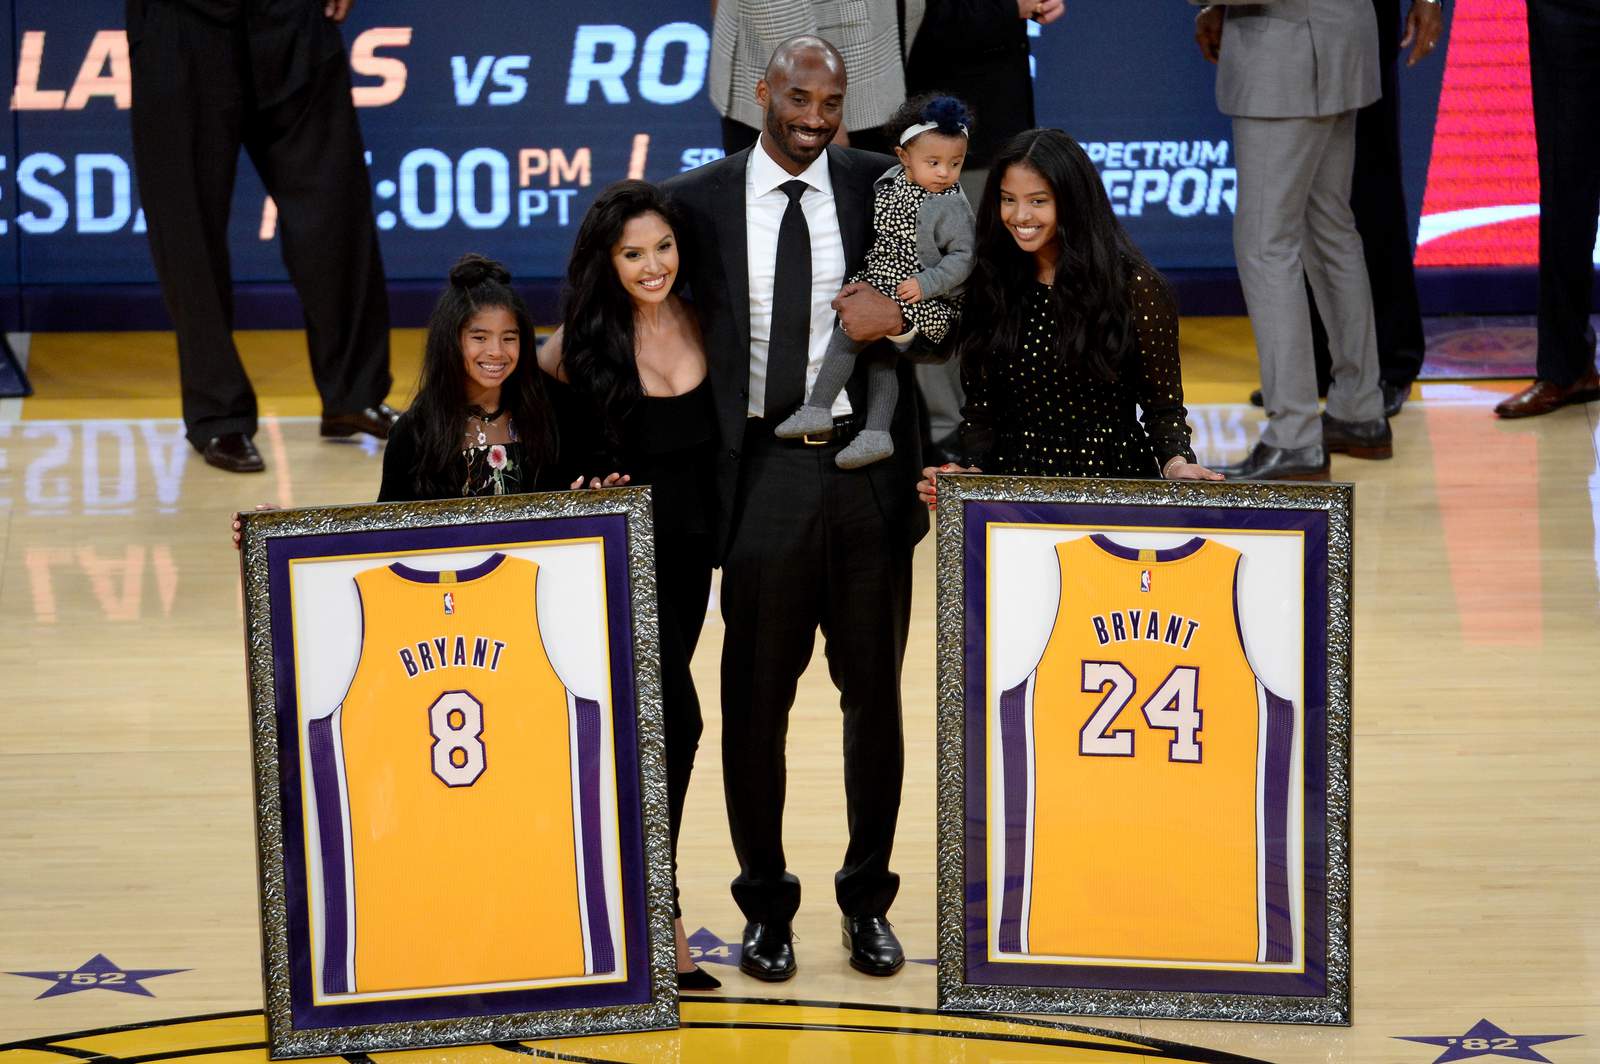 Kobe Bryant poses with his family at halftime after both his No. 8 and No. 24 Los Angeles Lakers jerseys are retired at Staples Center on Dec. 18, 2017.